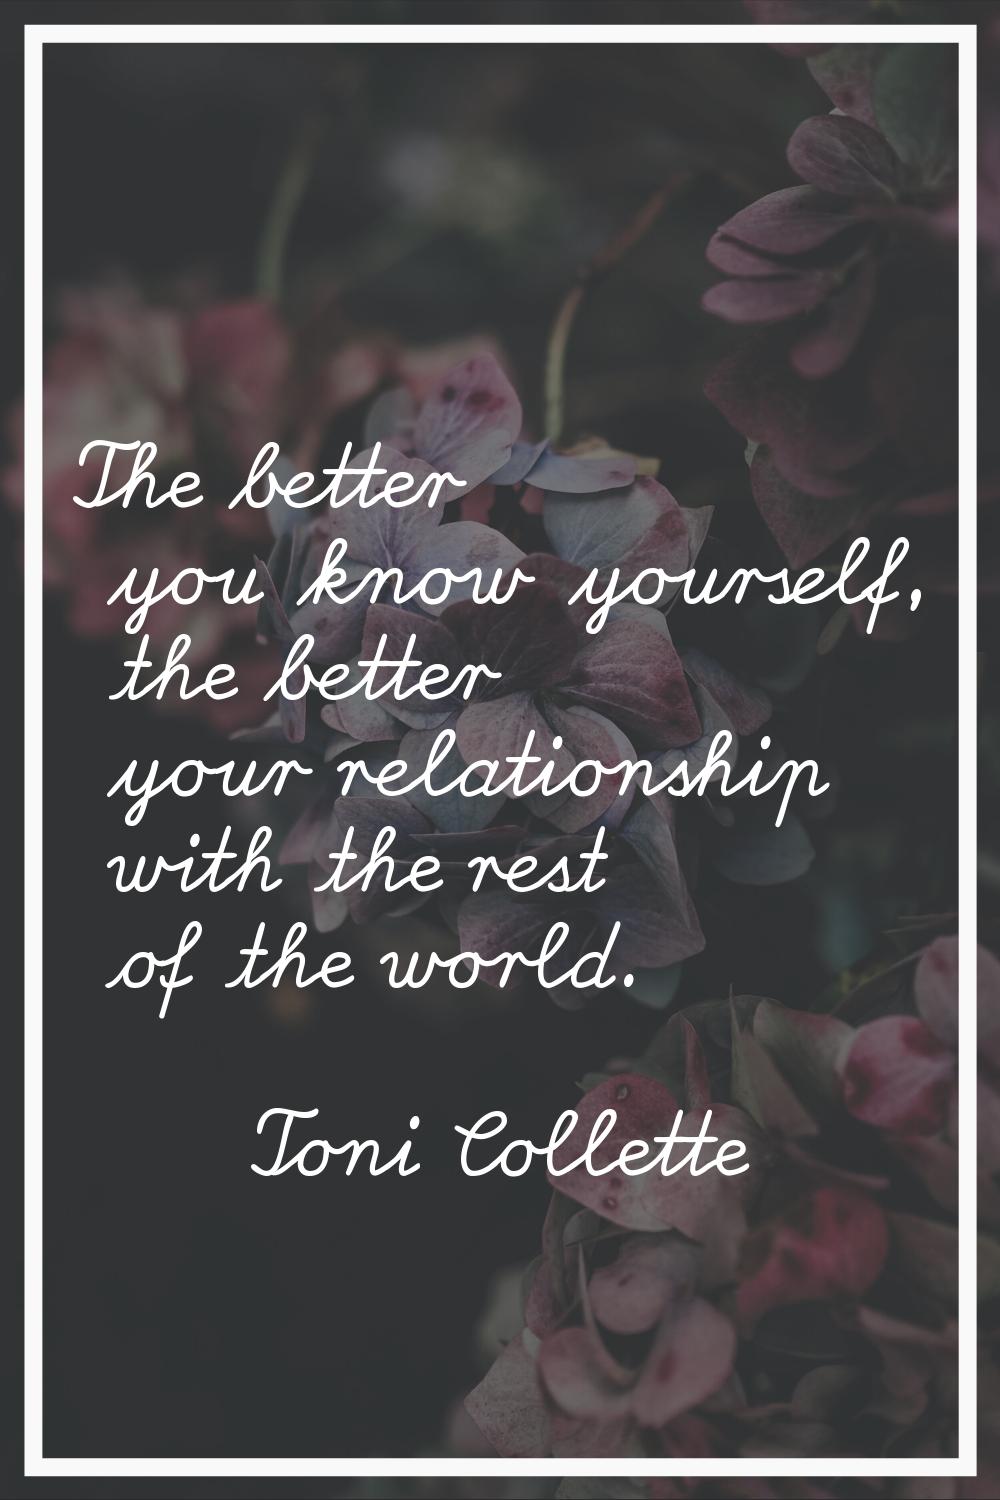 The better you know yourself, the better your relationship with the rest of the world.